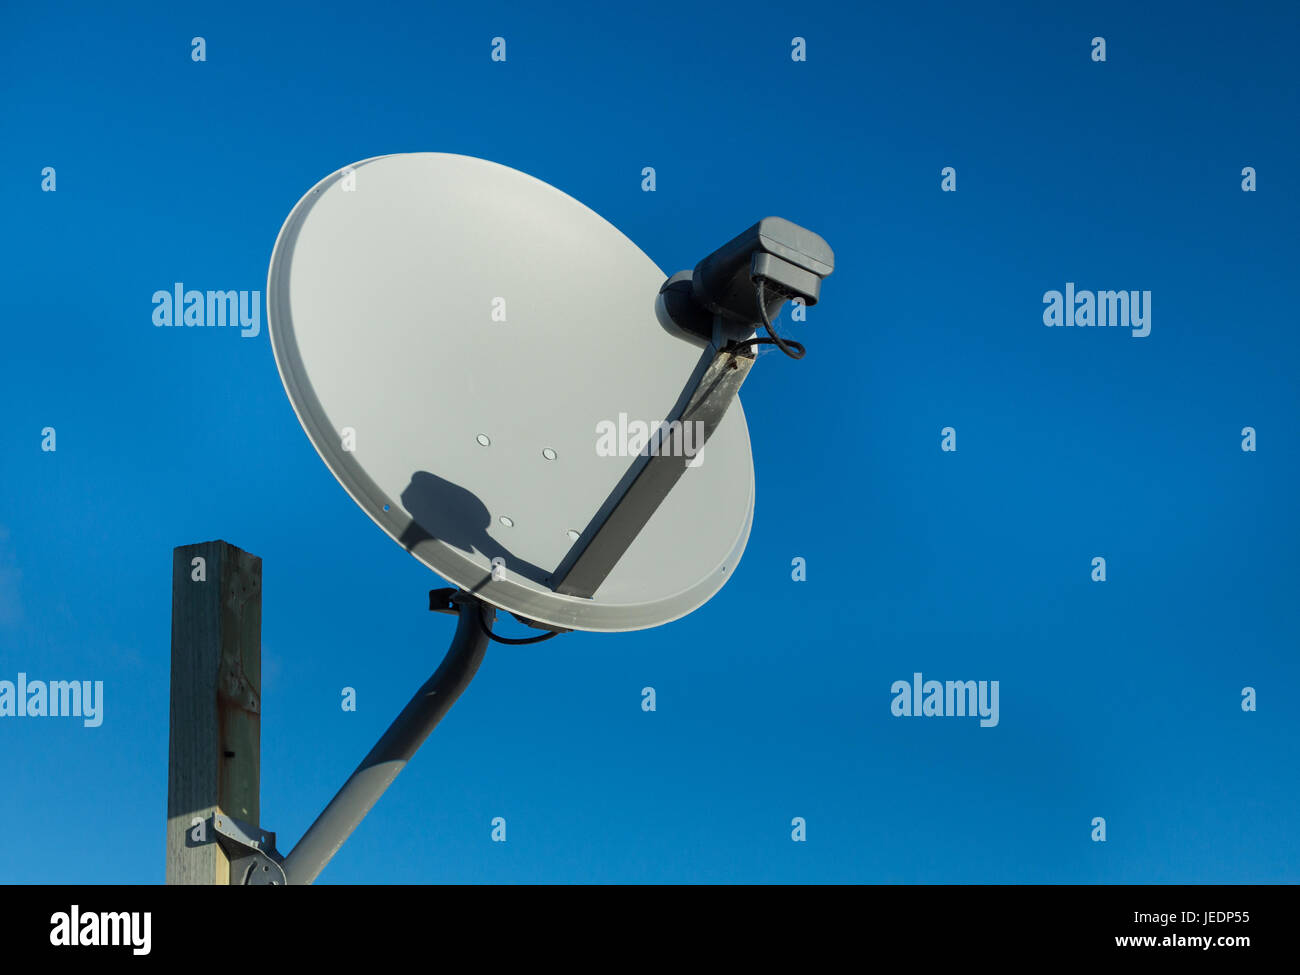 Standard satellite dish use for receiving digital Television signal. Stock Photo